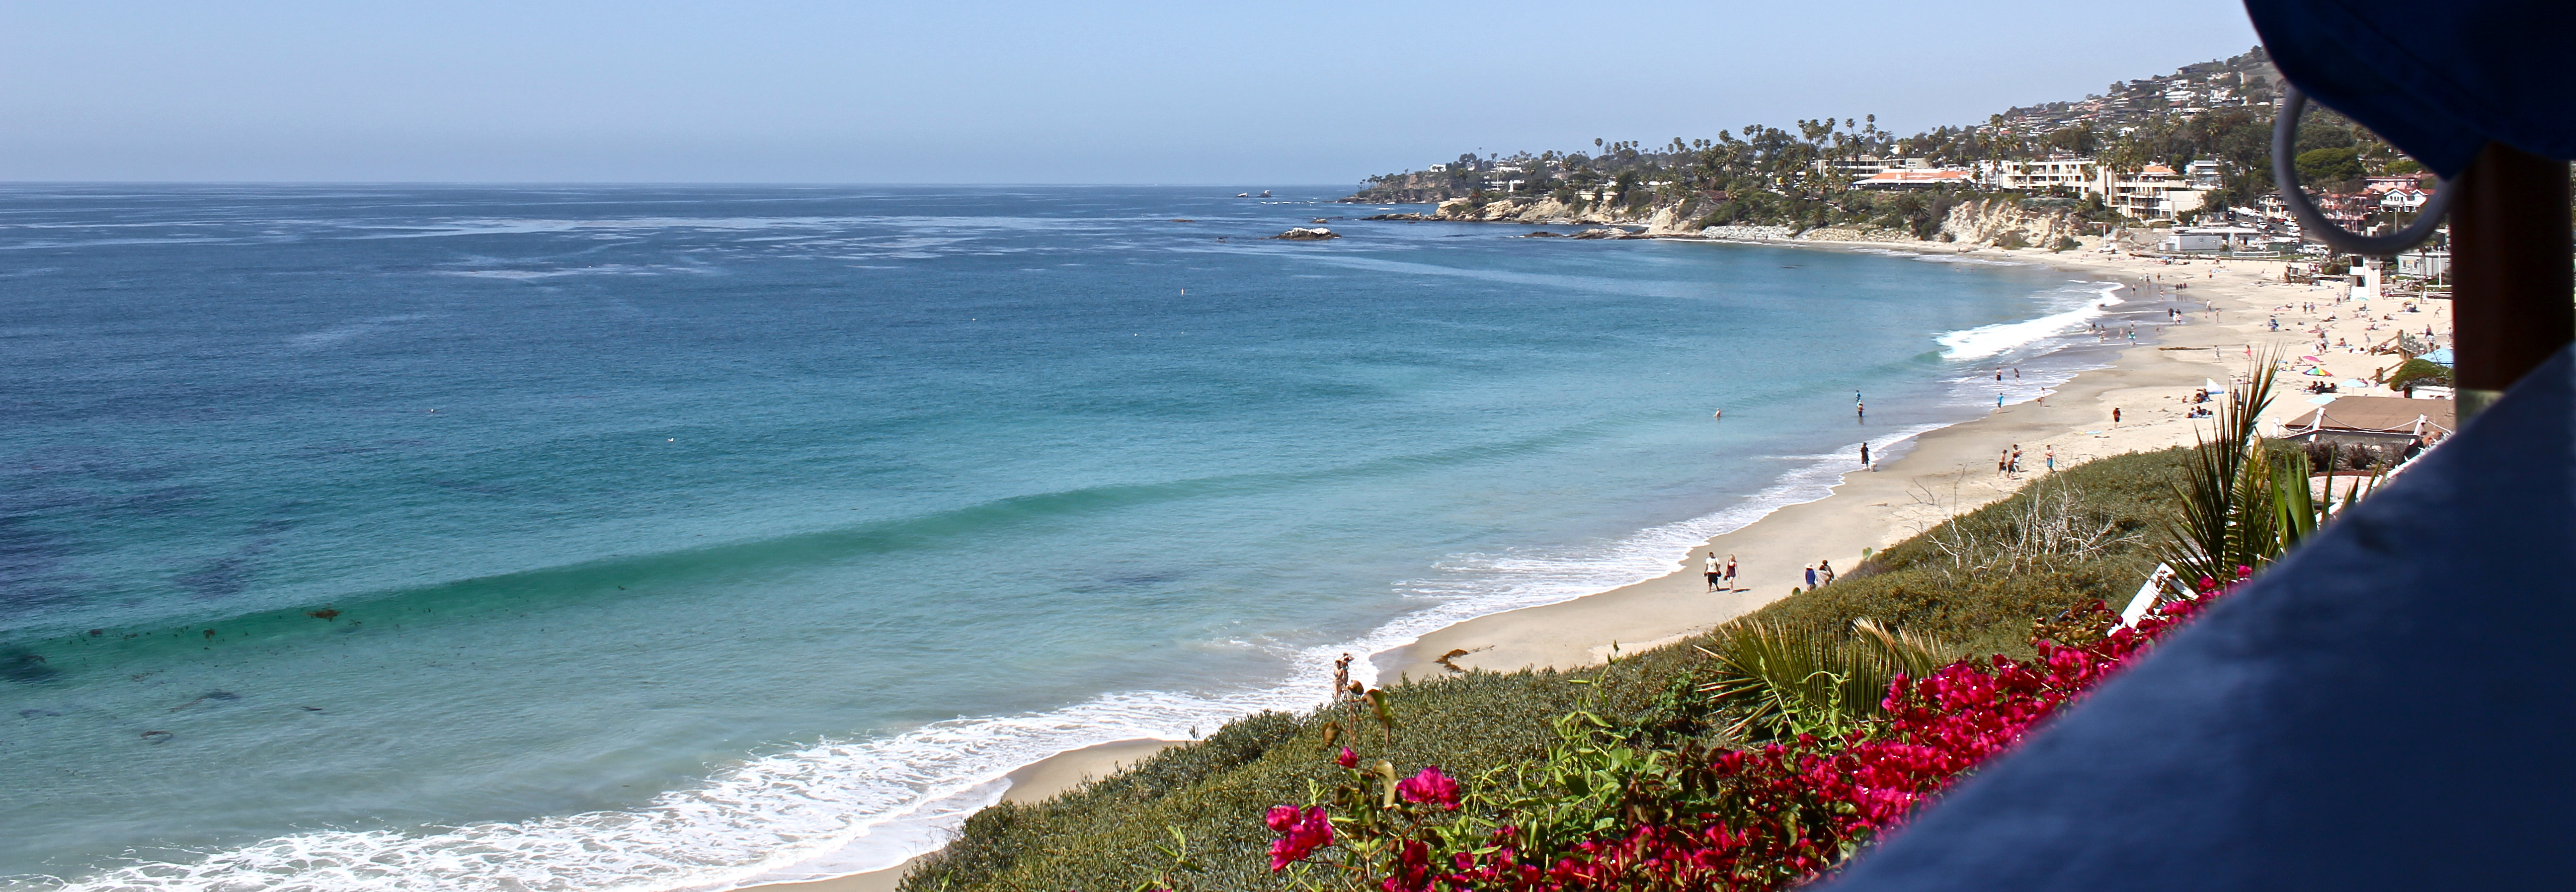 Day Date in Laguna Beach, California: What to See, Eat & Do